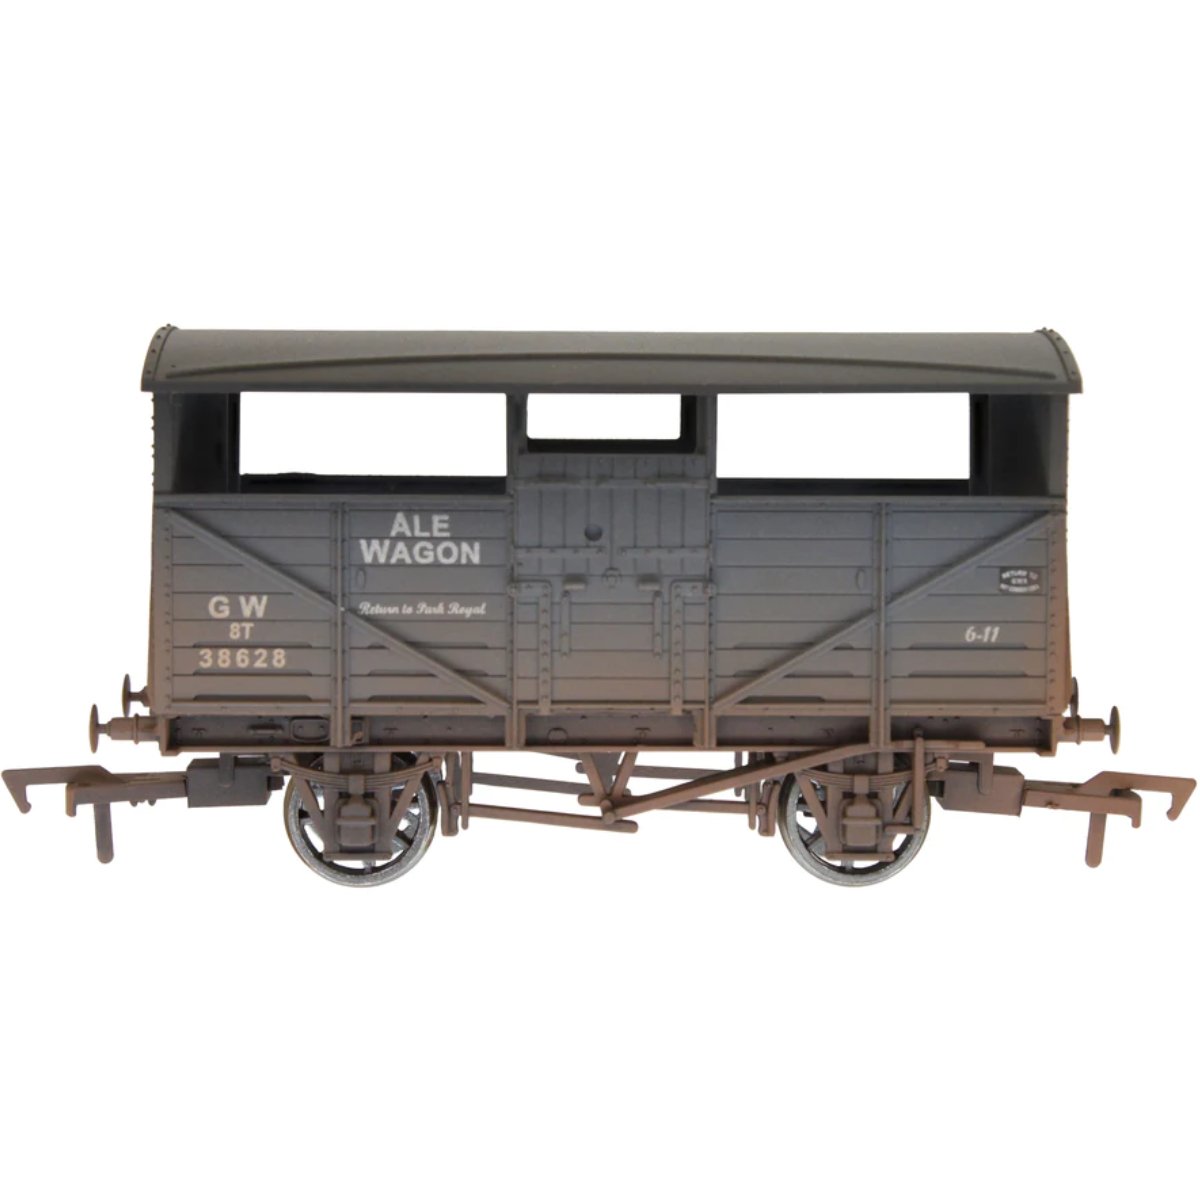 Dapol 4F-020-044 Cattle Wagon GWR 38628 Weathered - OO Gauge - Phillips Hobbies